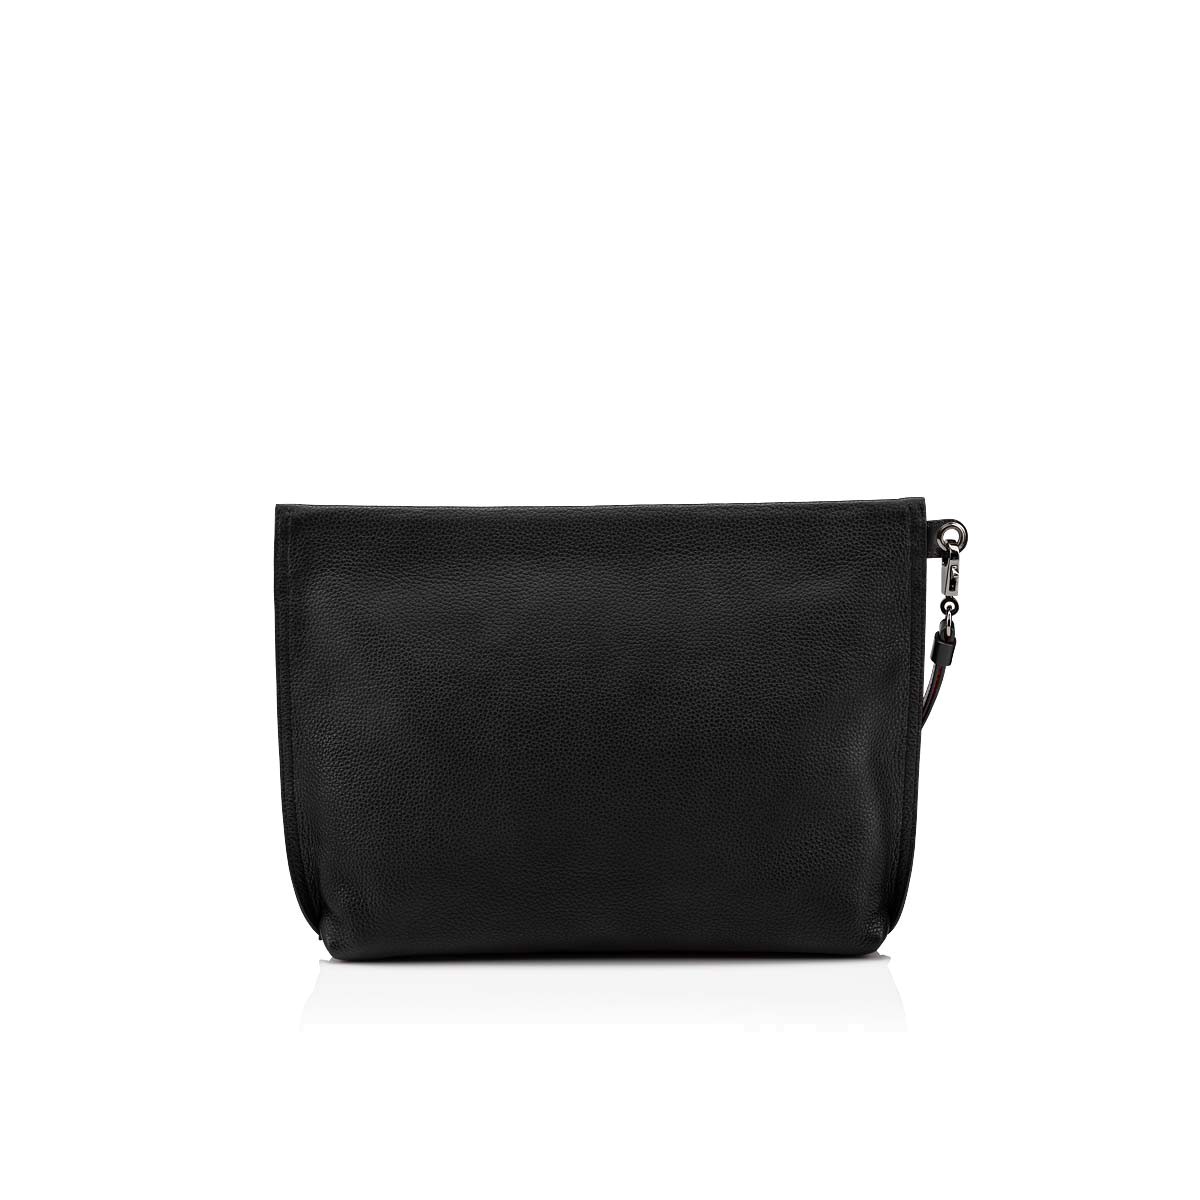 Citypouch Black Suede leather - Handbags - Christian Louboutin